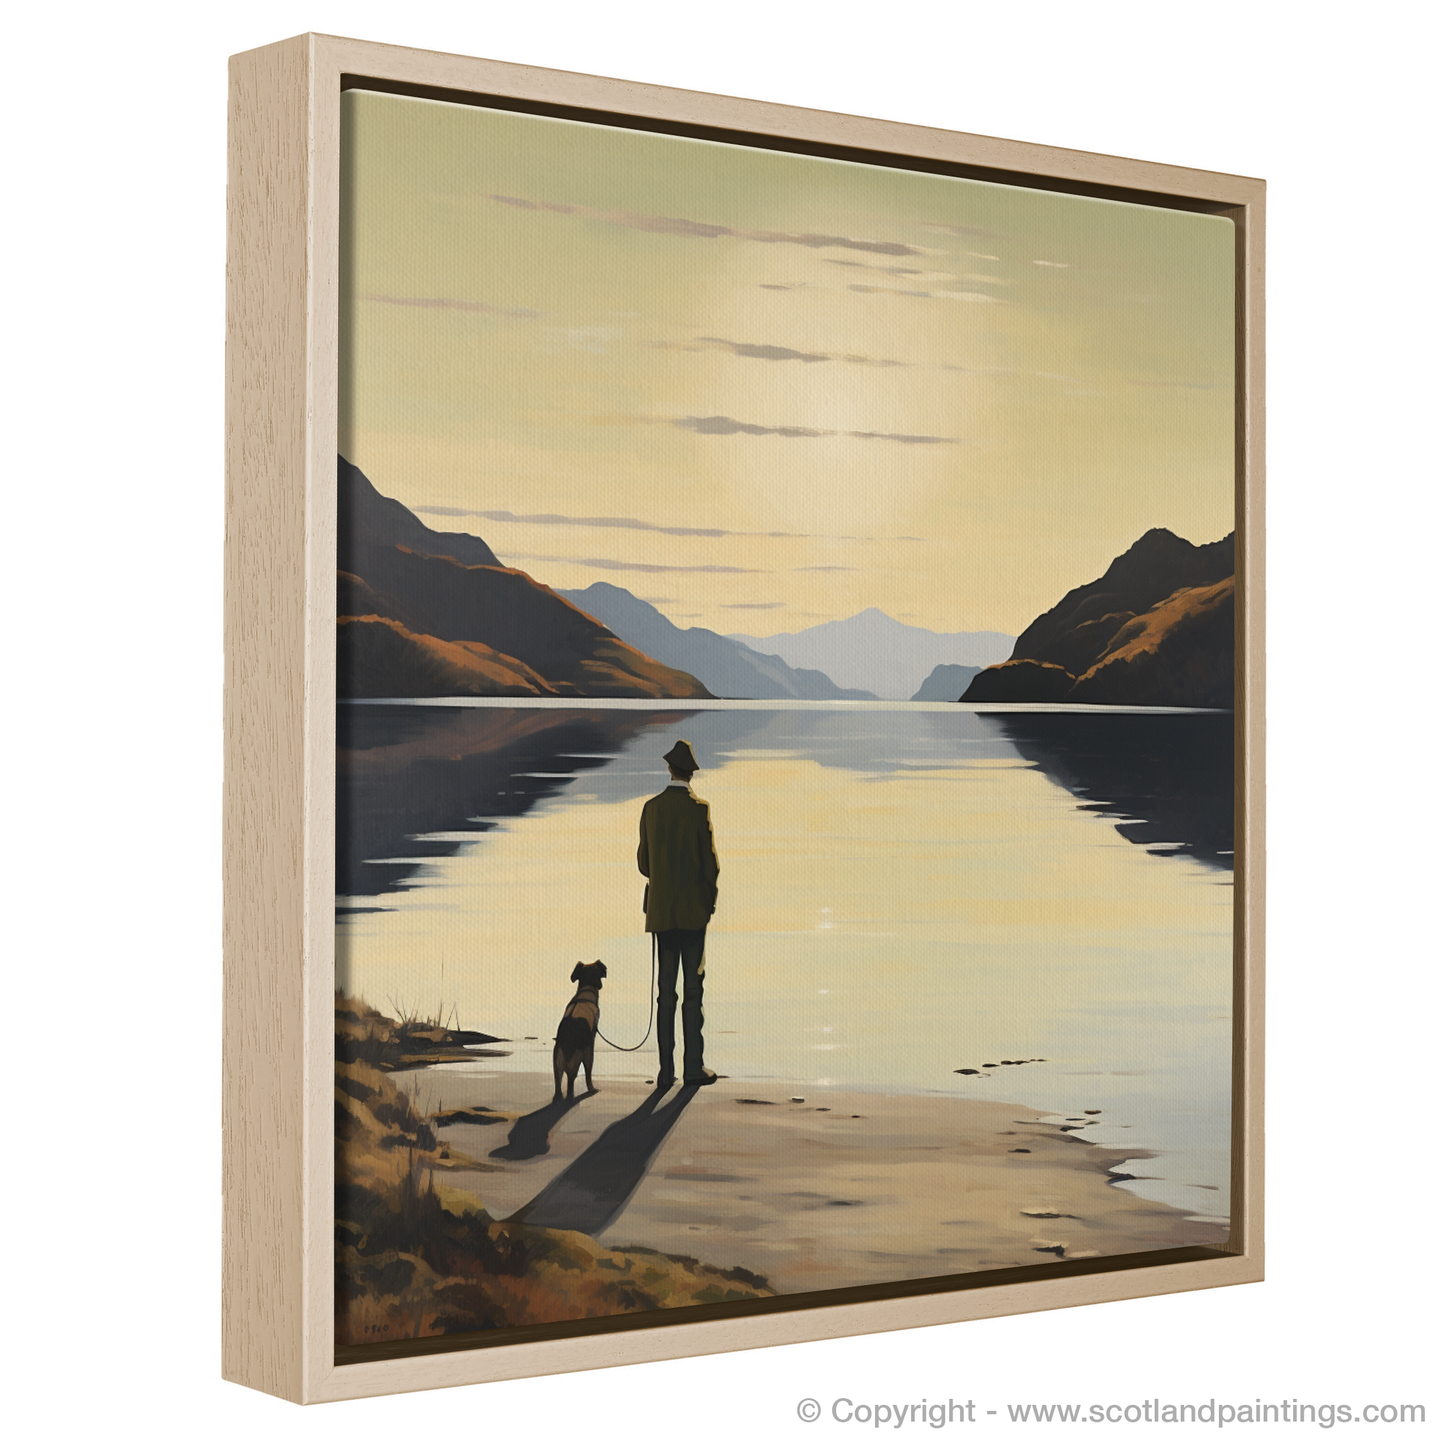 Painting and Art Print of A man walking dog at the side of Loch Lomond entitled "Evening Stroll by Loch Lomond".